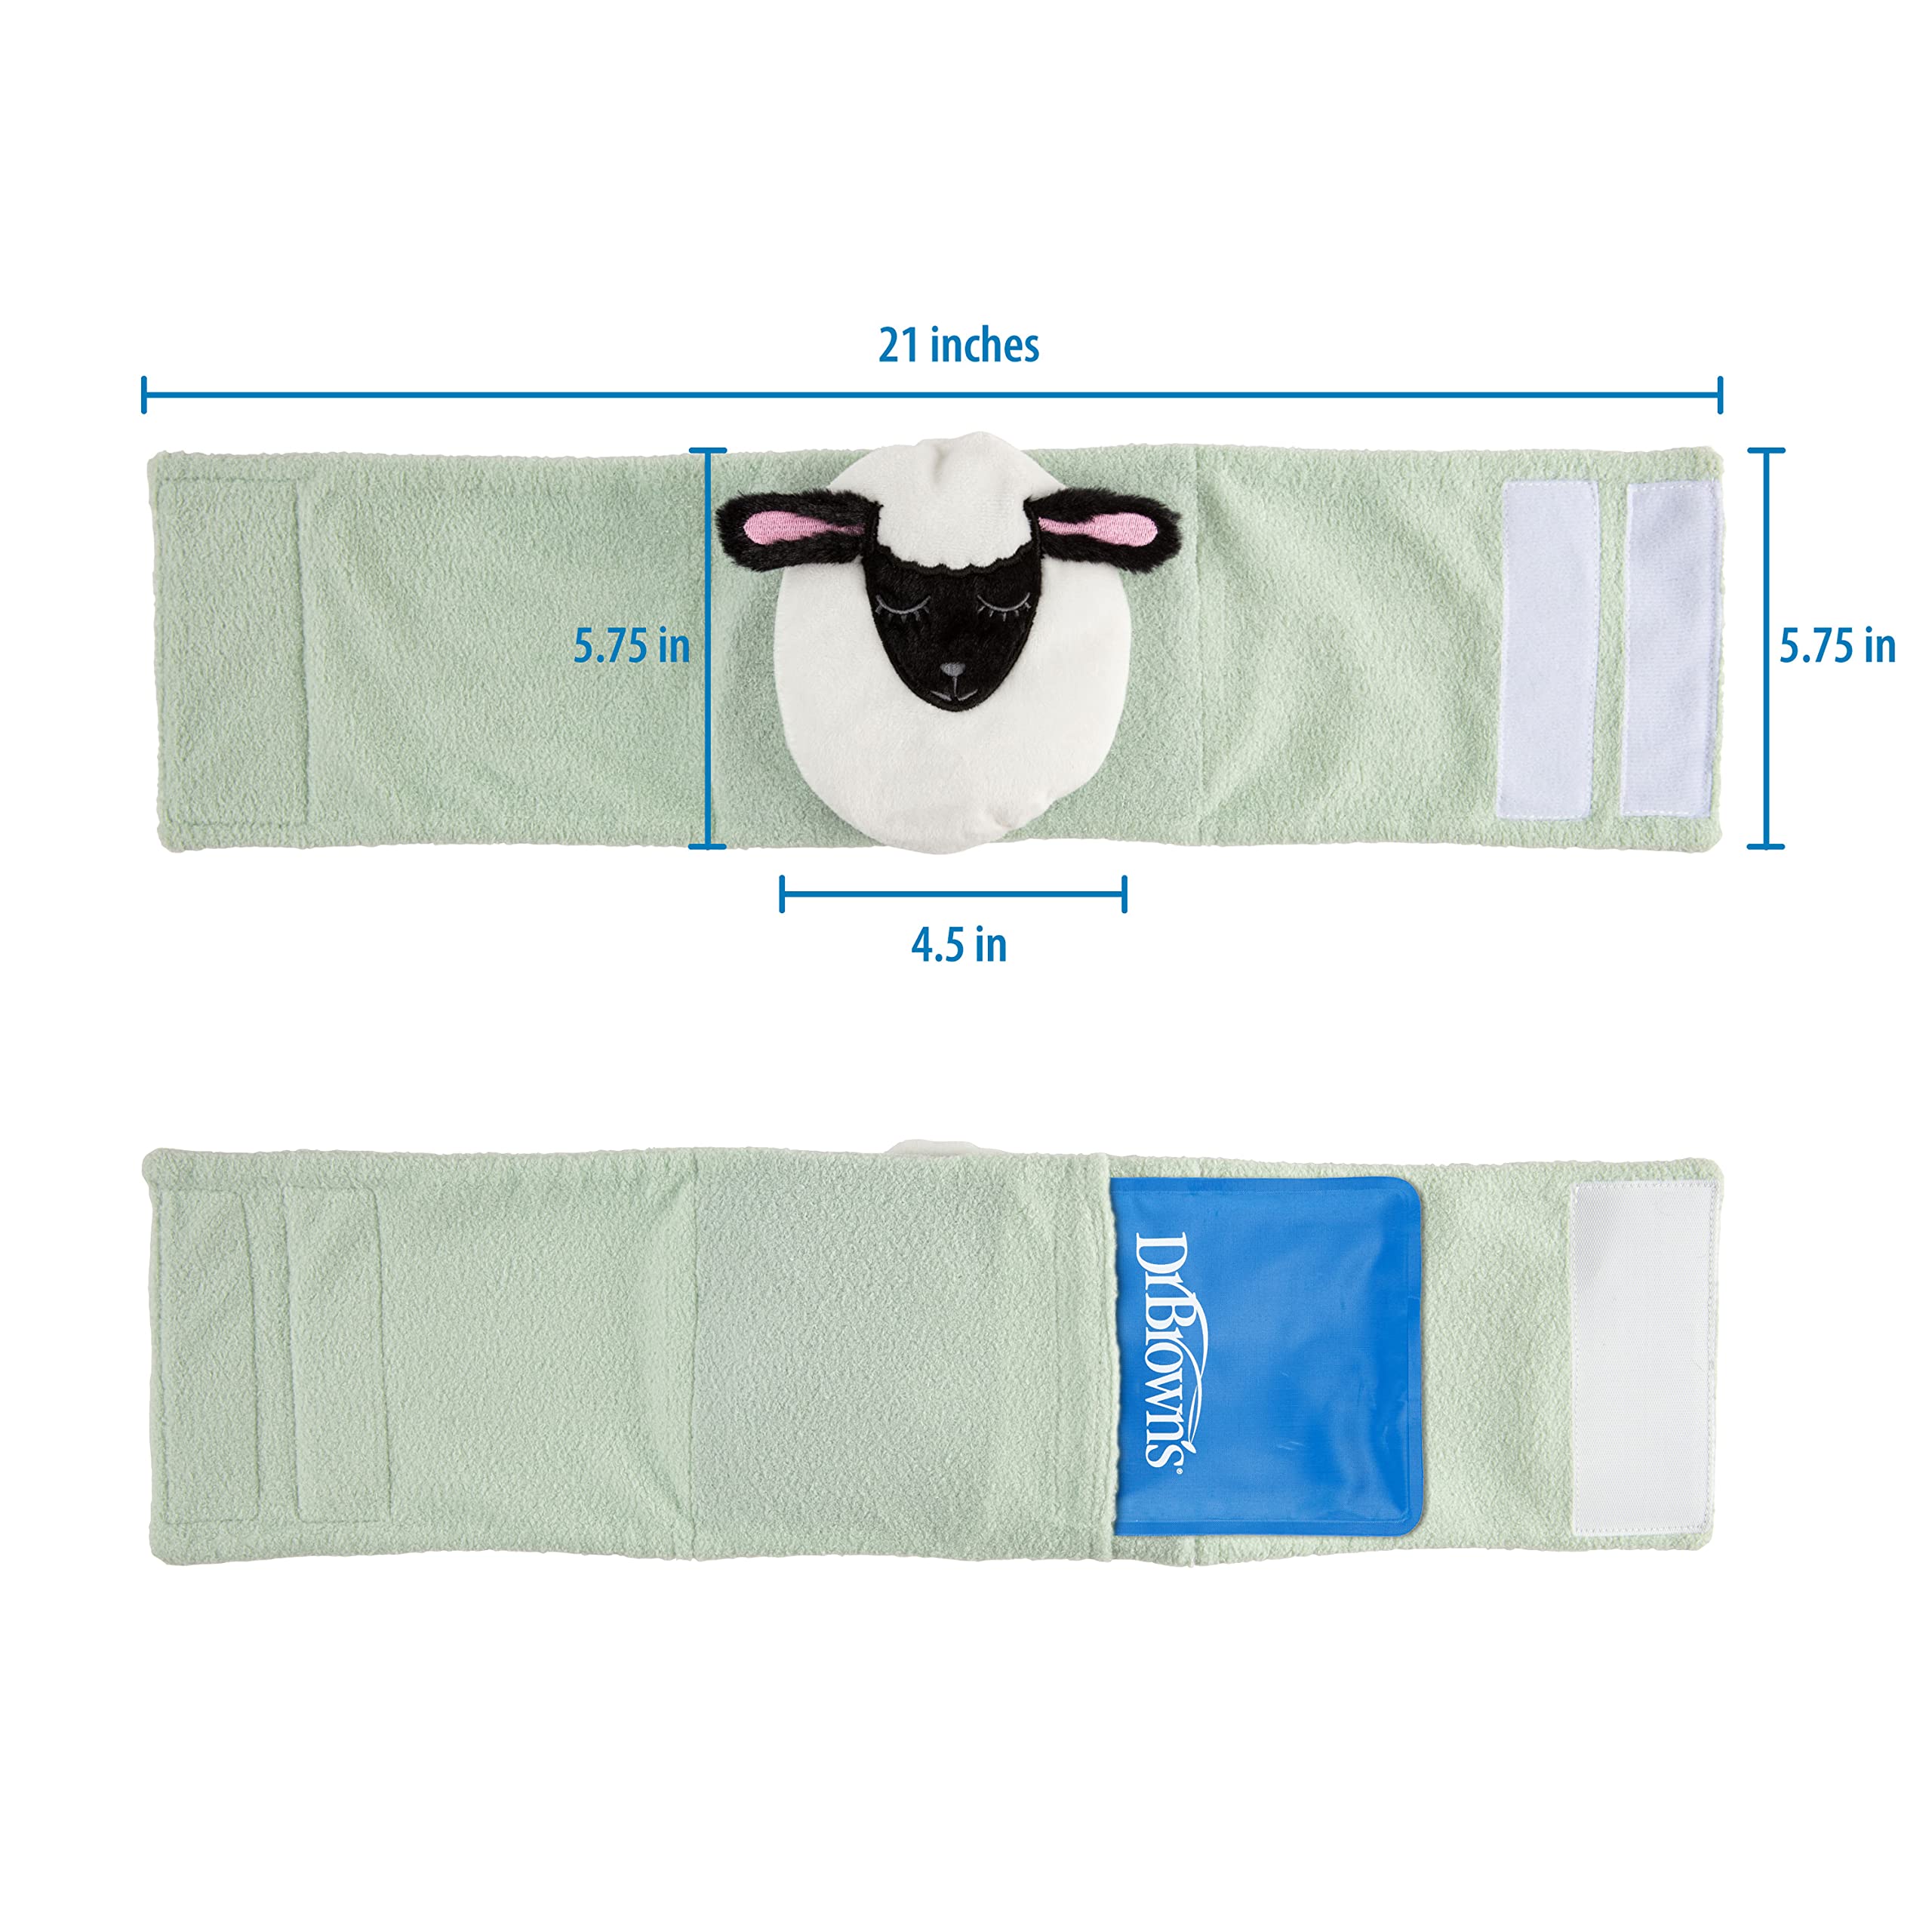 Dr. Brown’s Infant Gripebelt for Colic Relief, Heated Tummy Wrap, Baby Swaddling Belt for Gas Relief, Natural Relief for Upset Stomach in Babies and Toddlers, Lamb, 0-3m